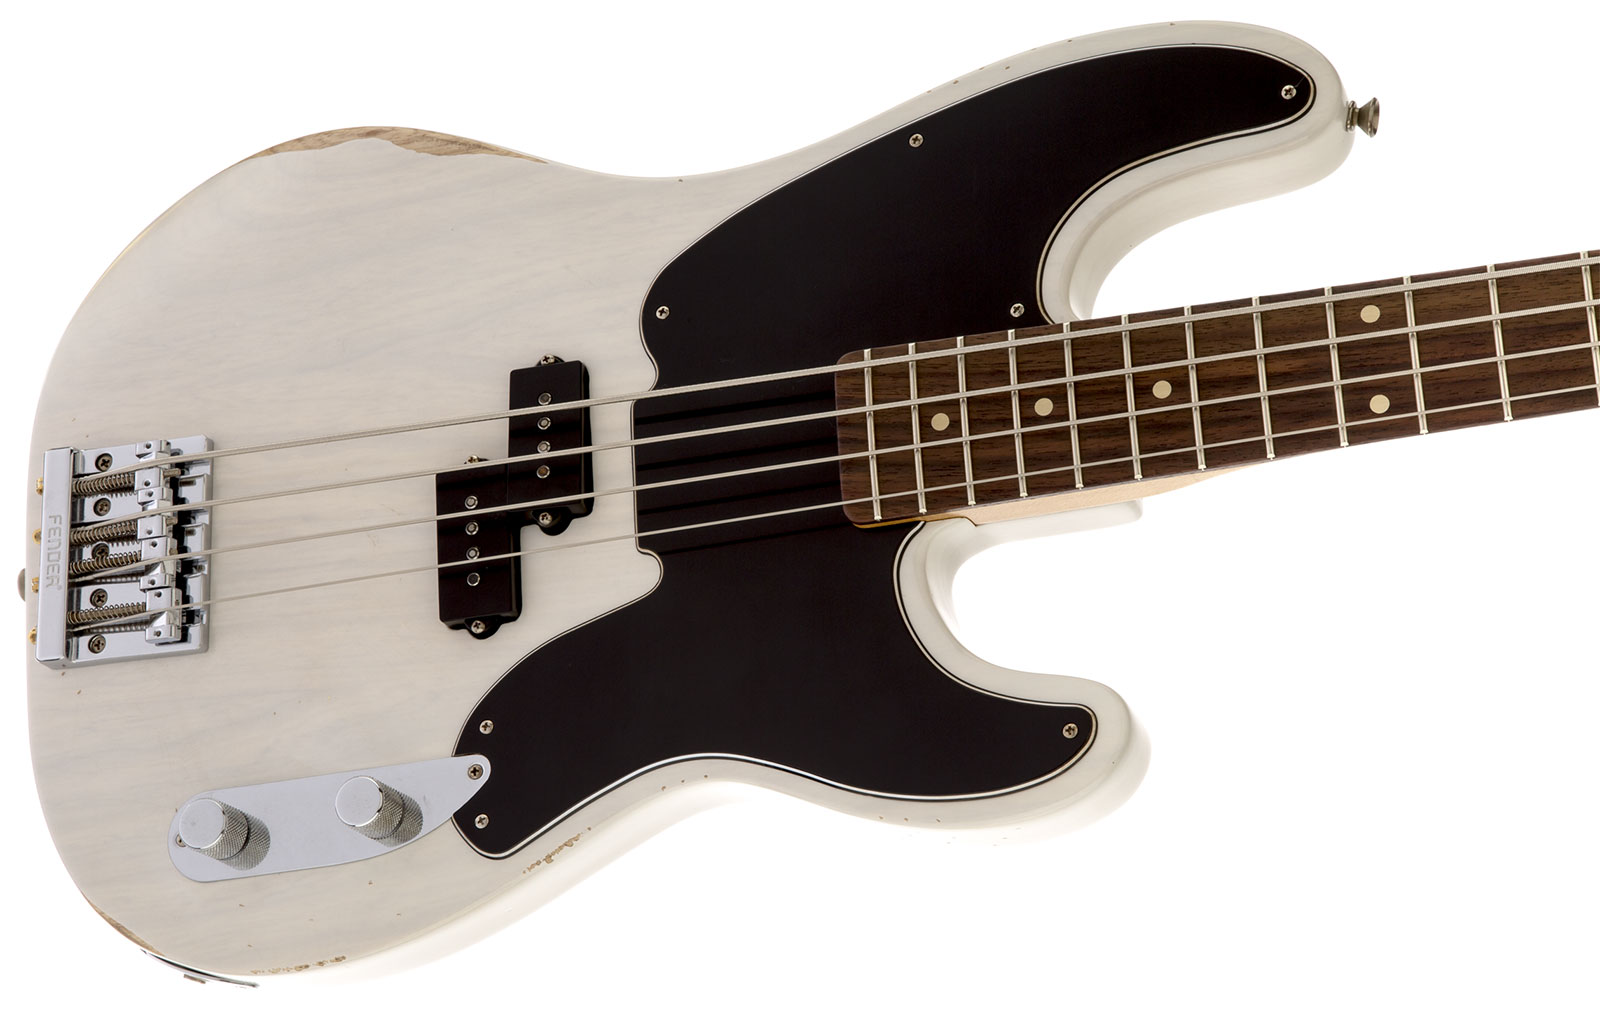 Fender Mike Dirnt Precision Bass Mex Signature Rw - White Blonde - Solid body electric bass - Variation 2